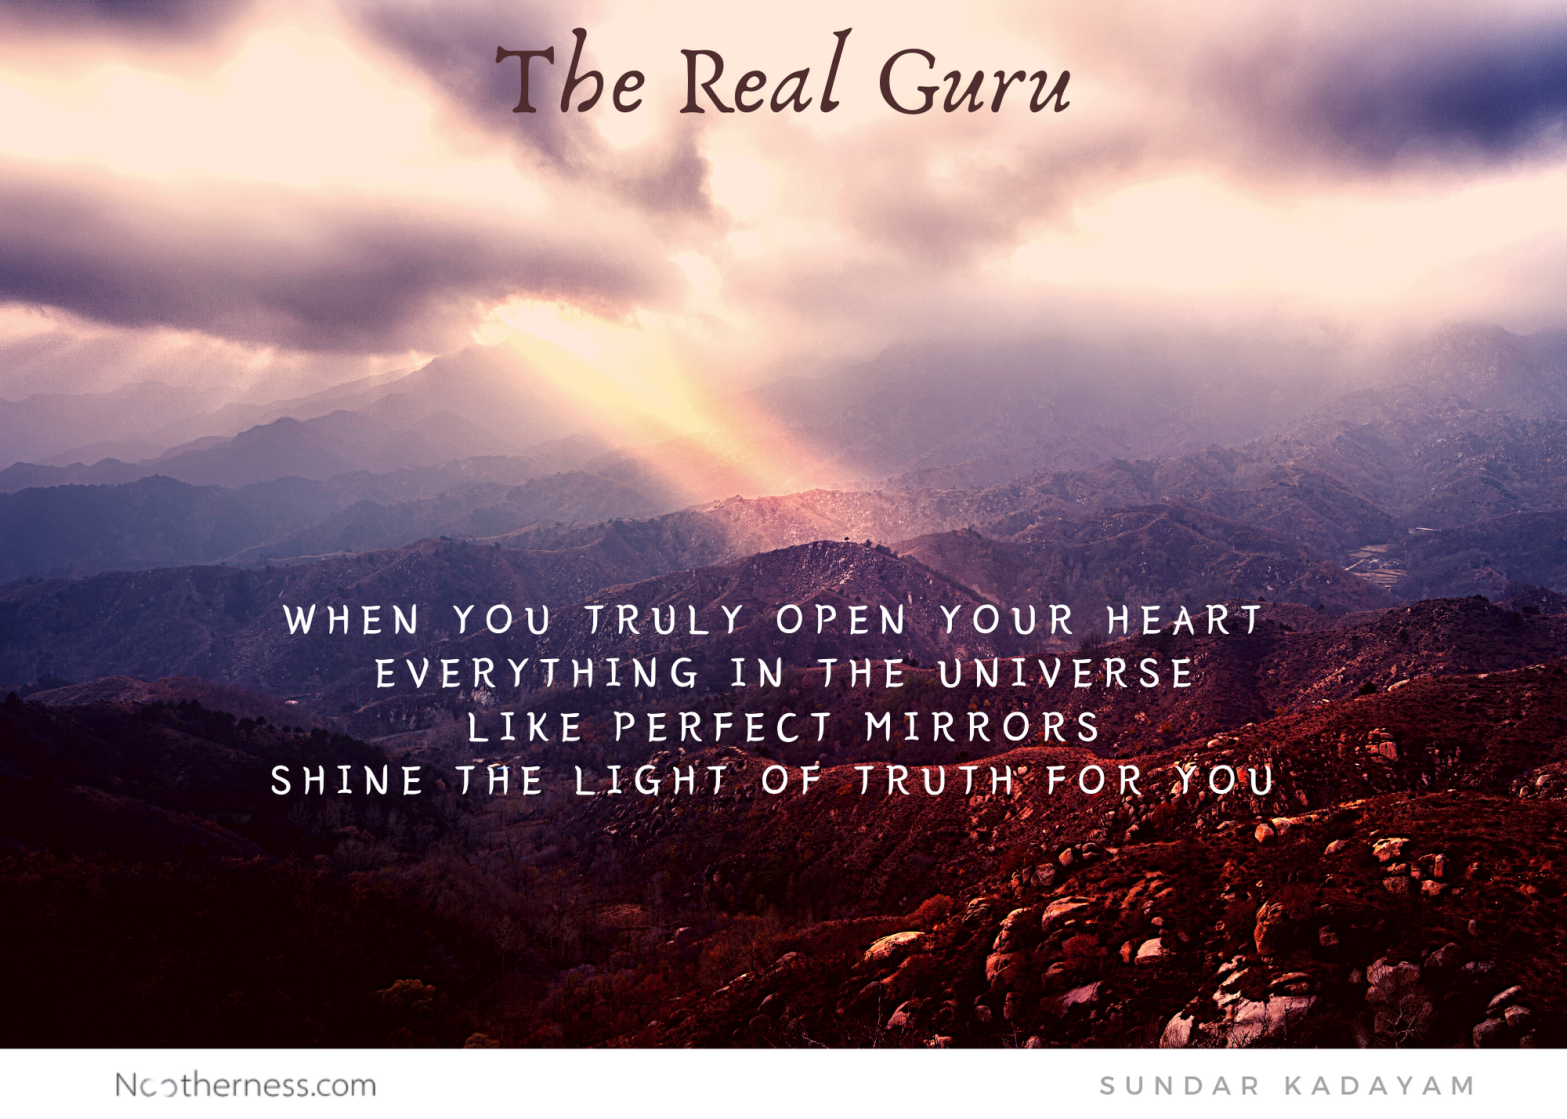 Who or what is the Real Guru?